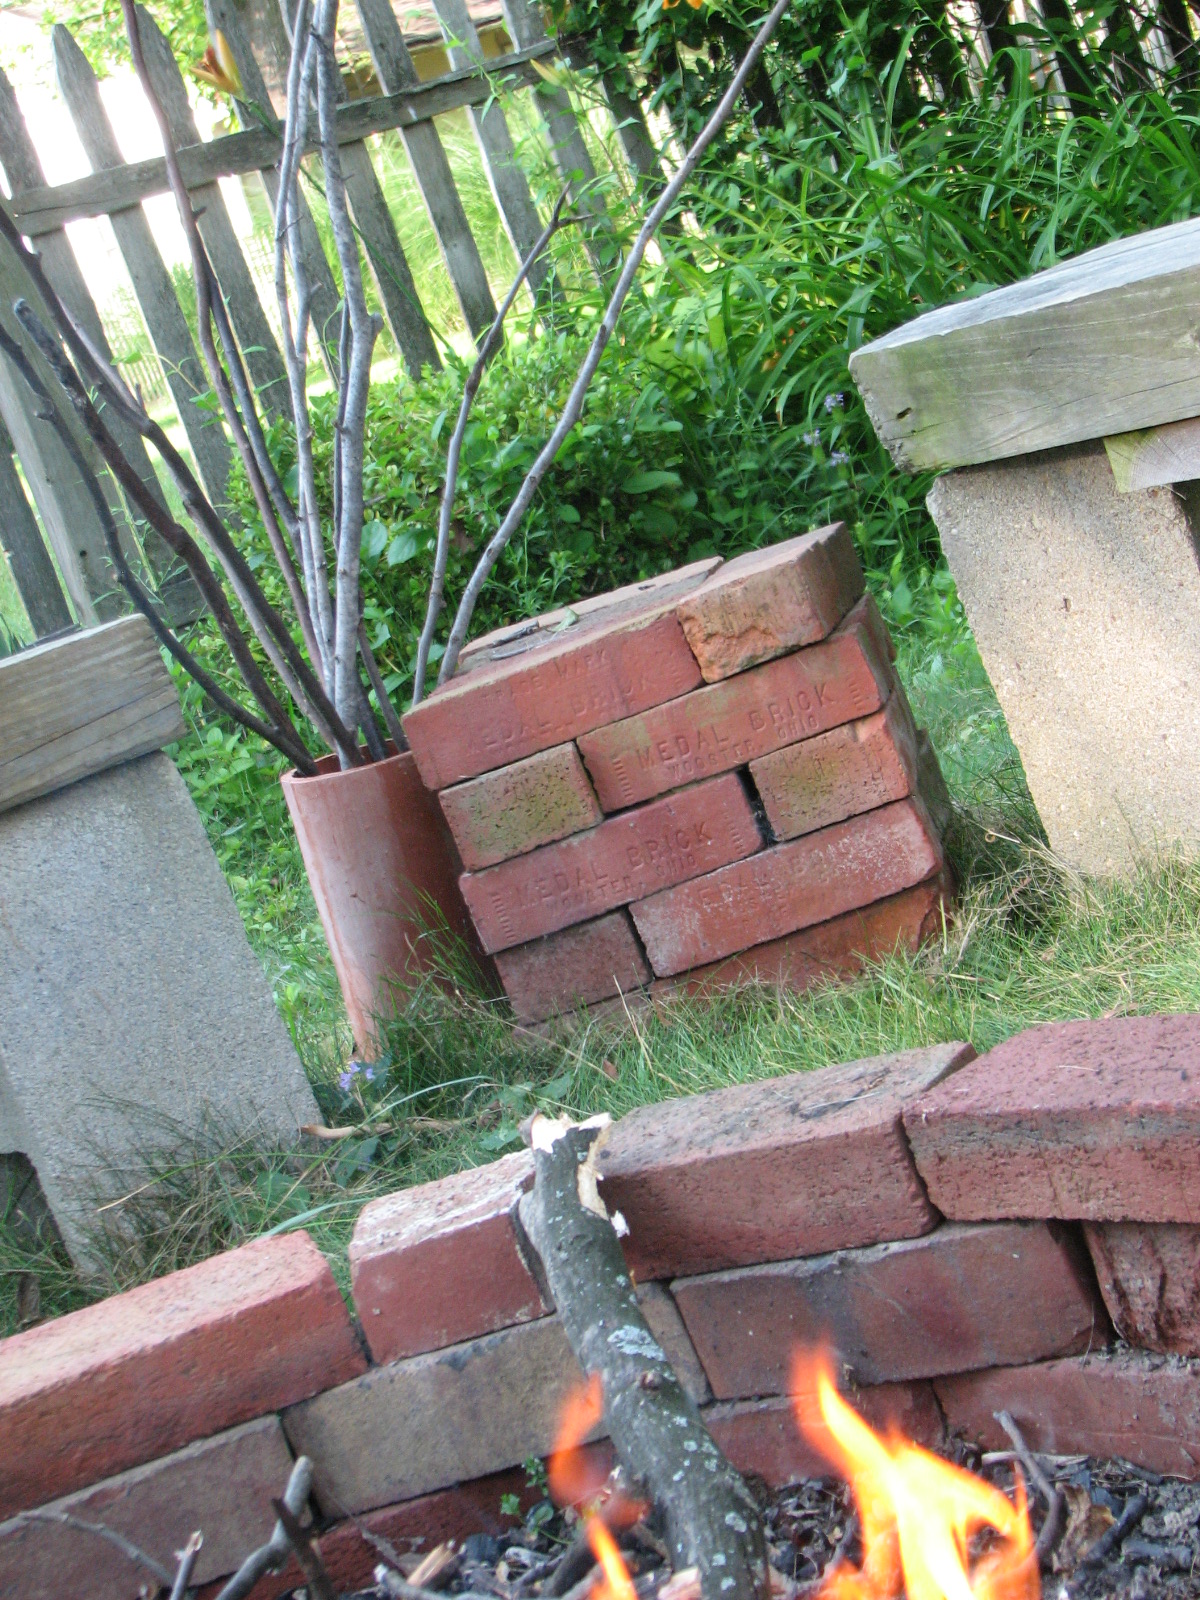 Budget Fire Pit From Reclaimed Brick, How To Make Your Own Fire Pit With Bricks